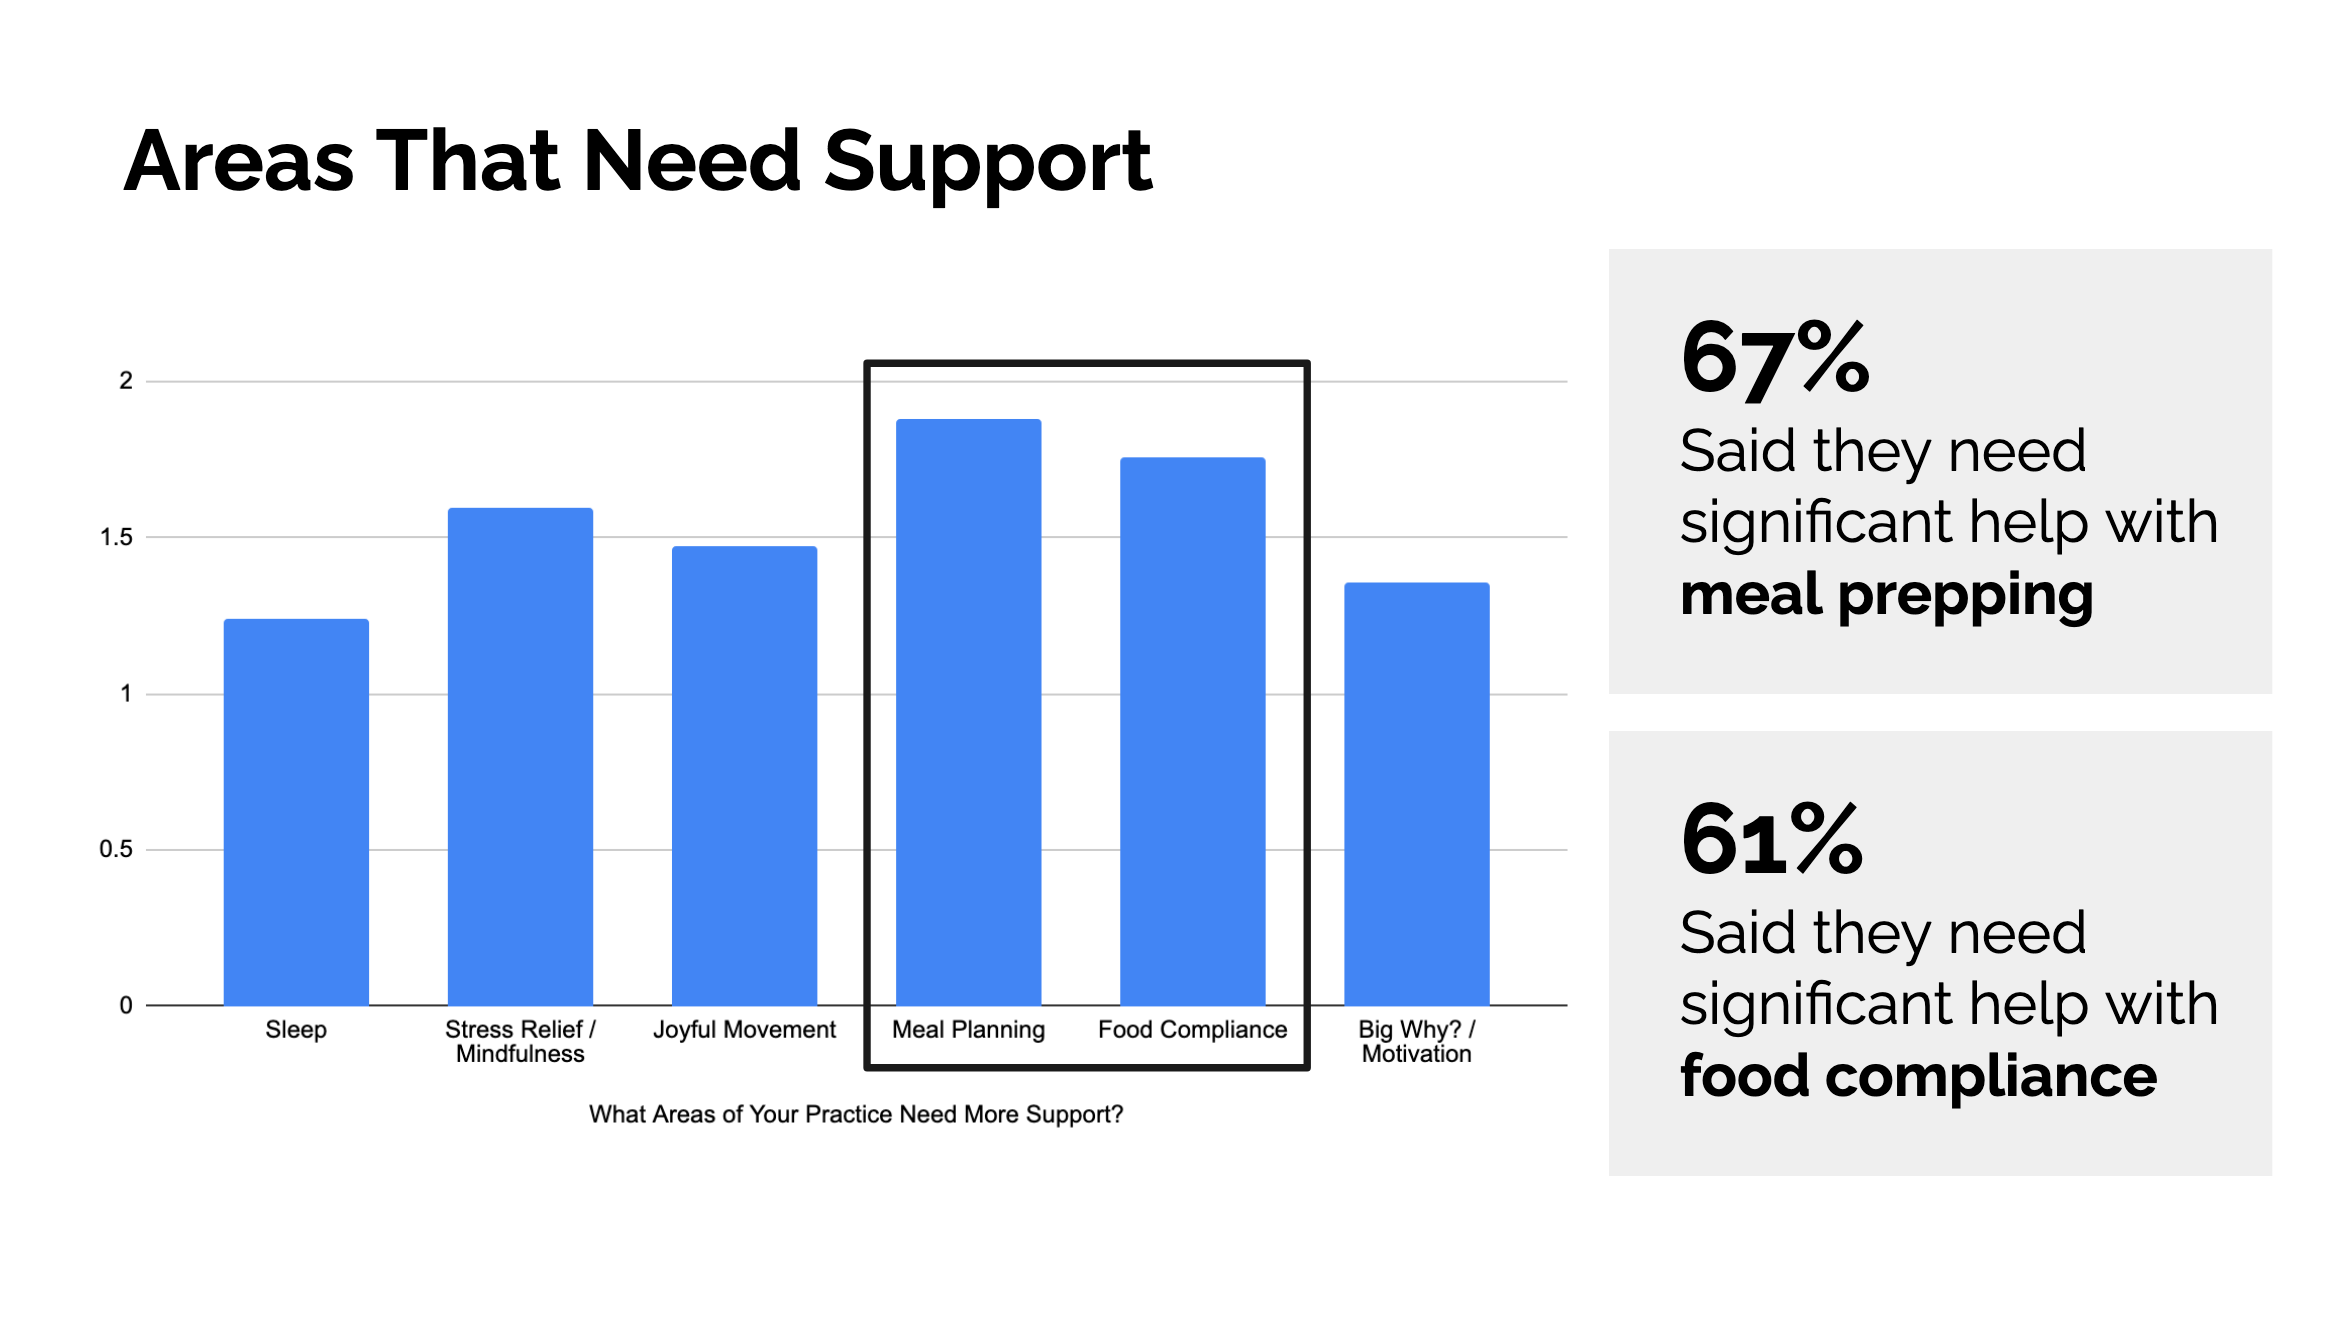 Bar graph showing that 67% of respondents need help with meal prepping and 61% need help with food compliance